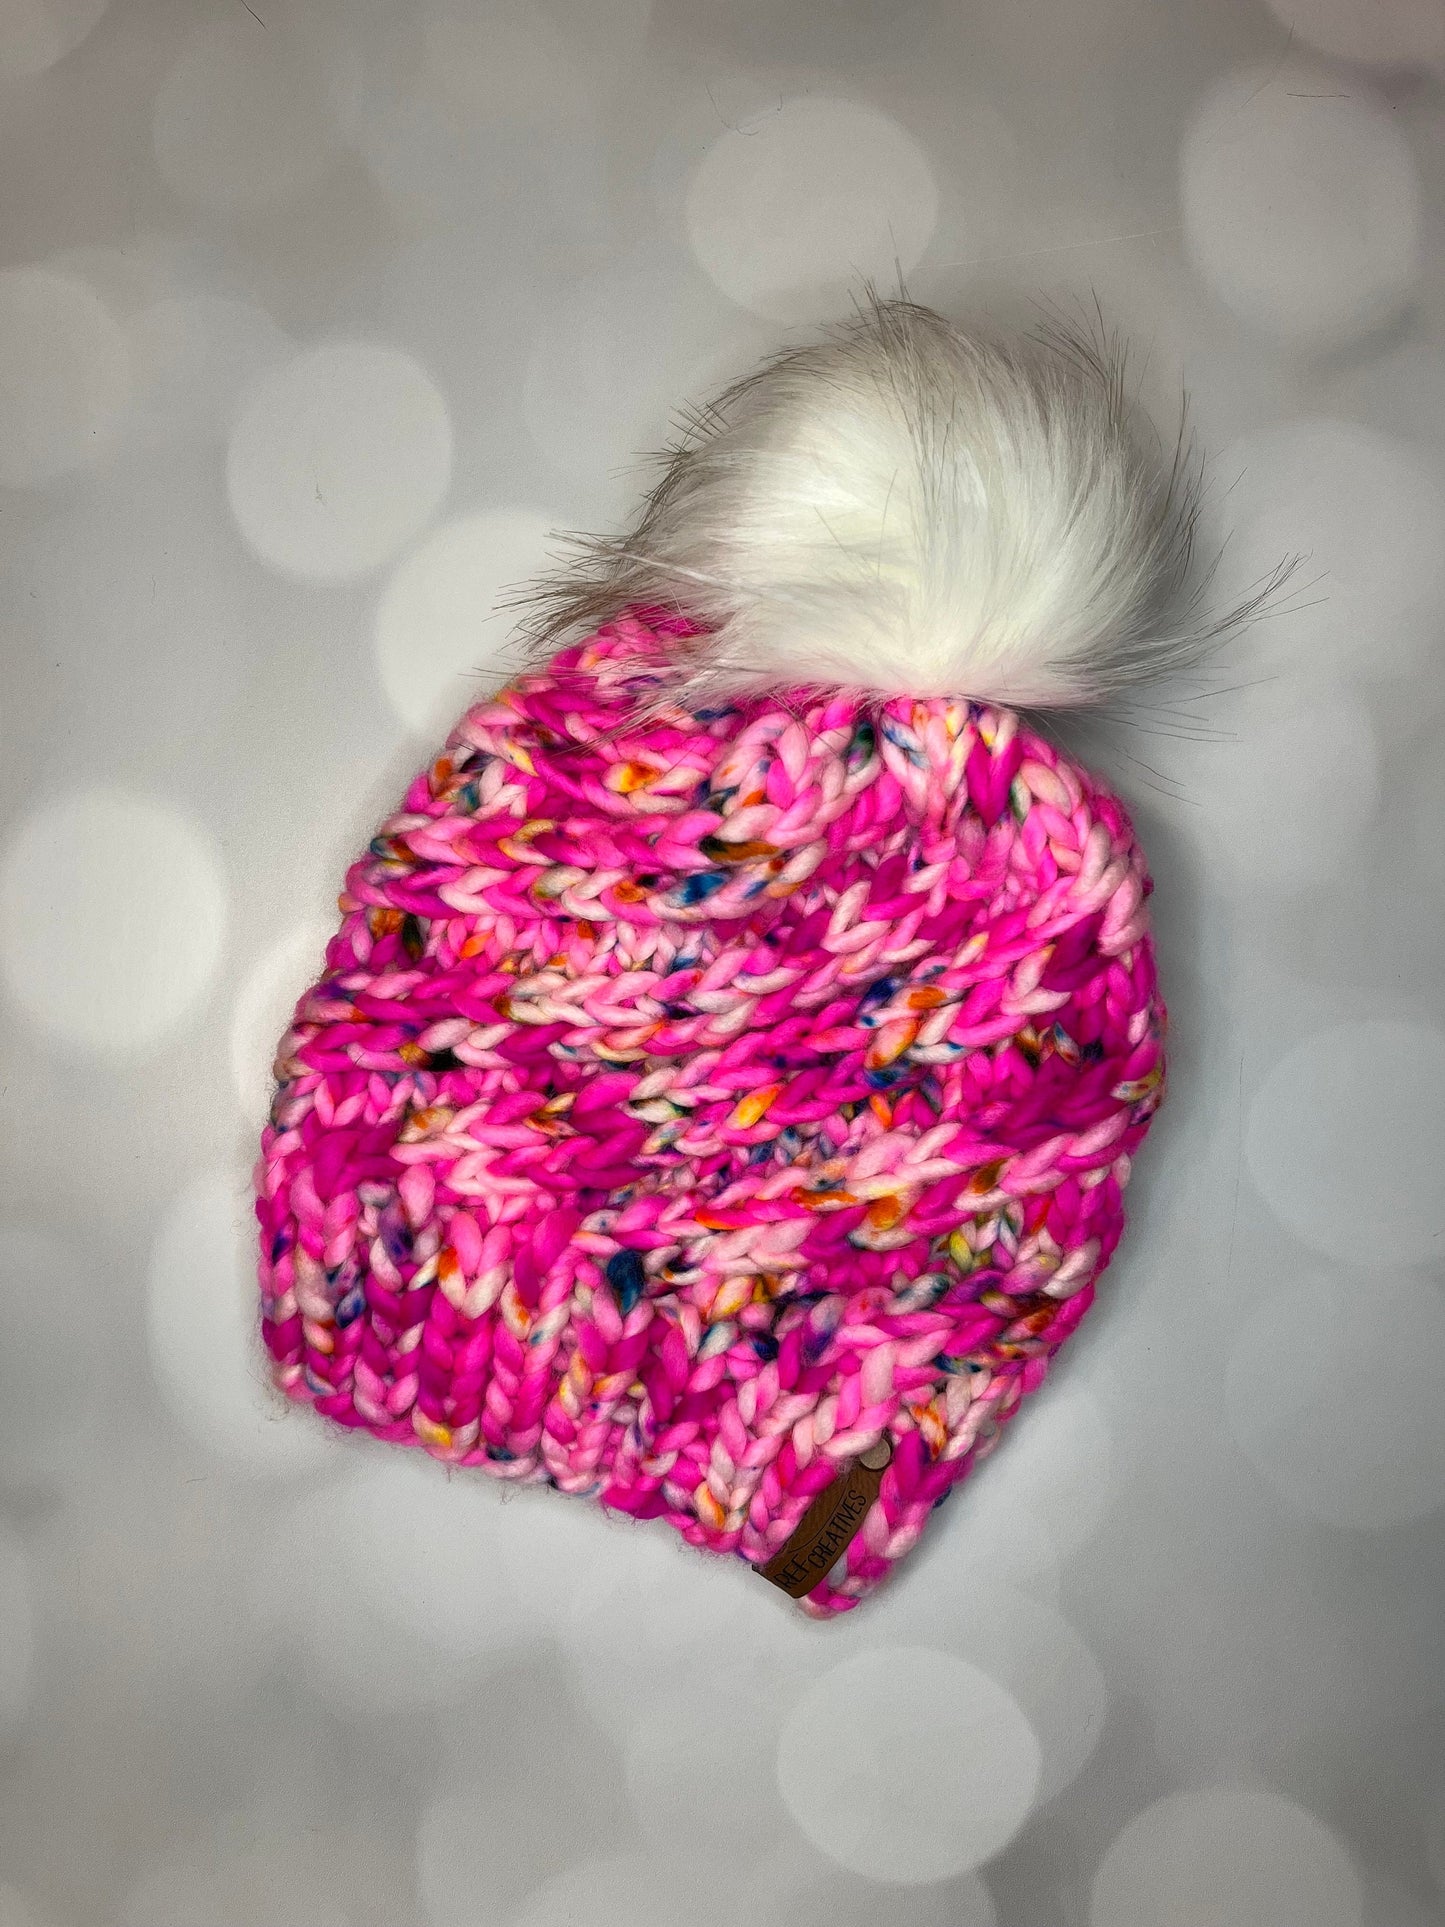 Luxury Pink Merino Wool Knit Hat - Neon Pink Hand Knit Hat with Hand Dyed Yarn